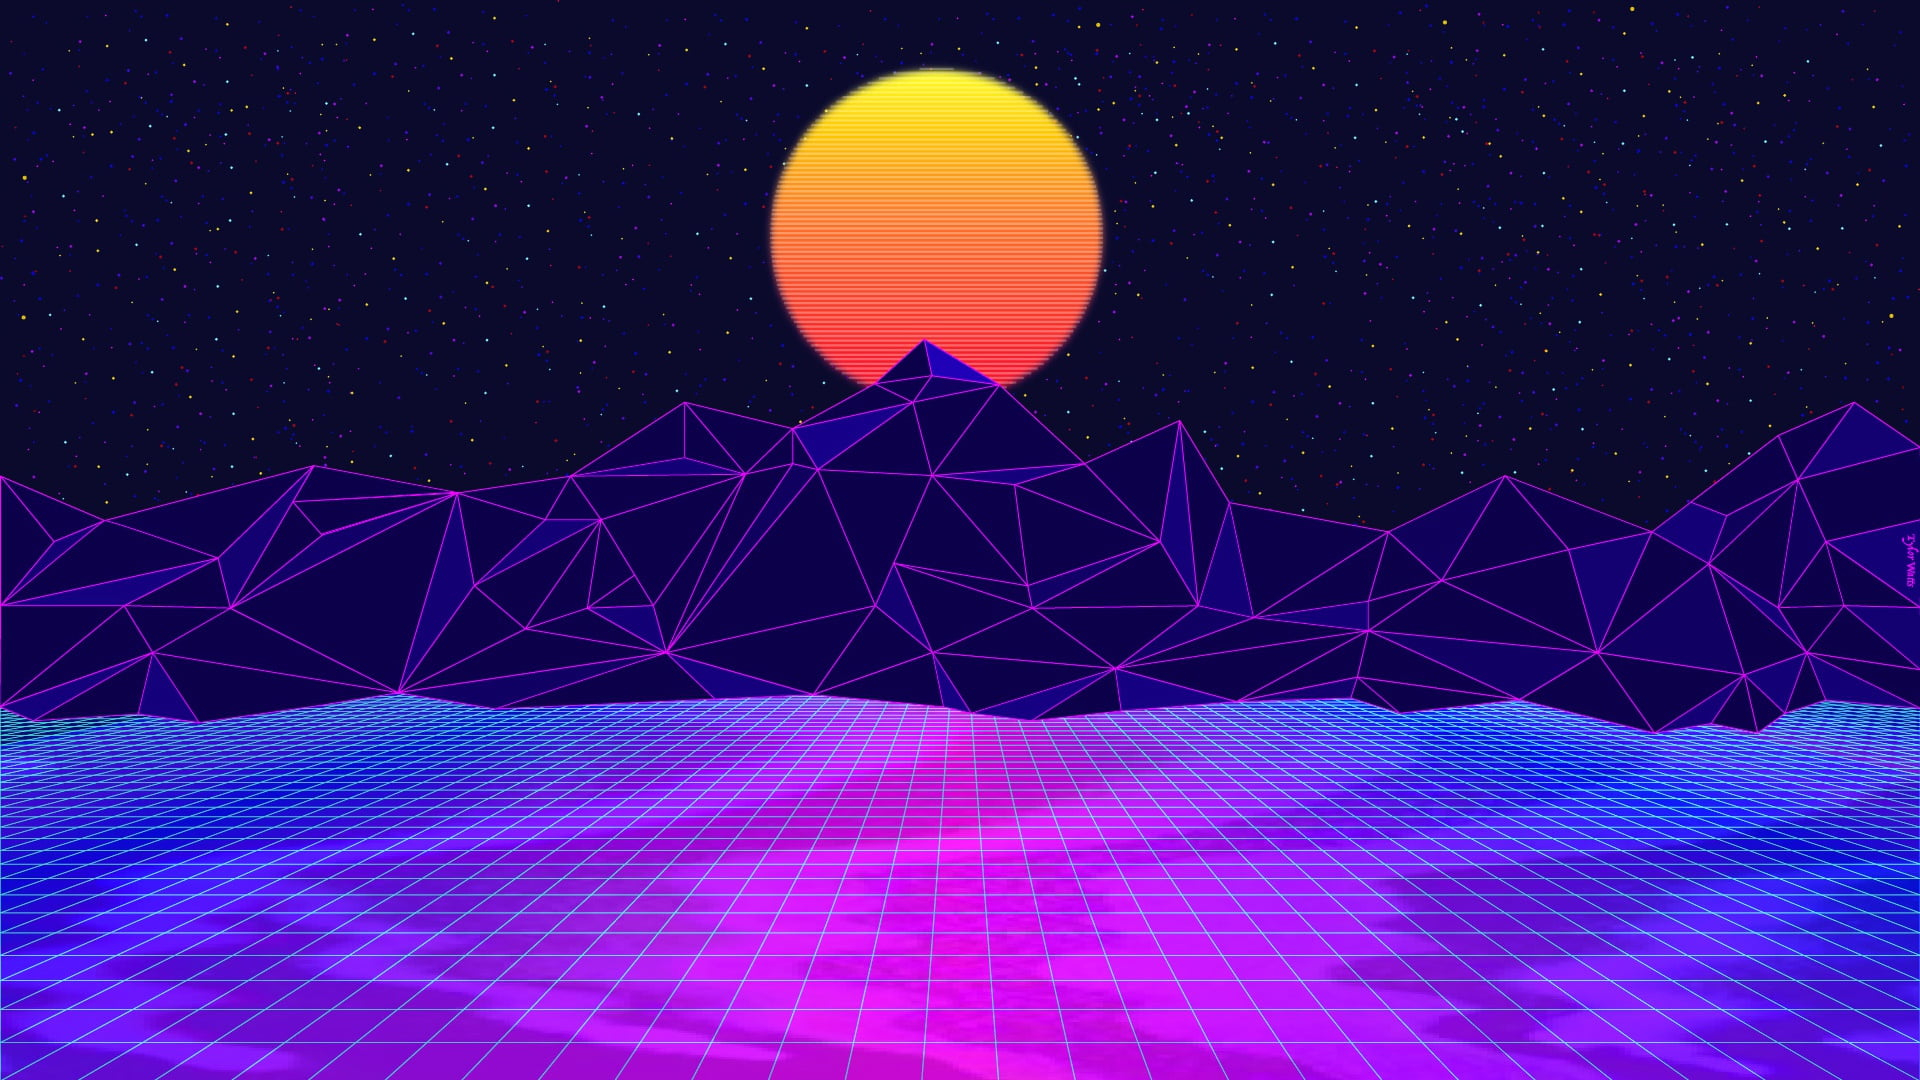 The sun, Mountains, Music, Space, 80s wallpaper, Neon, 80's, Synth, Retrowave